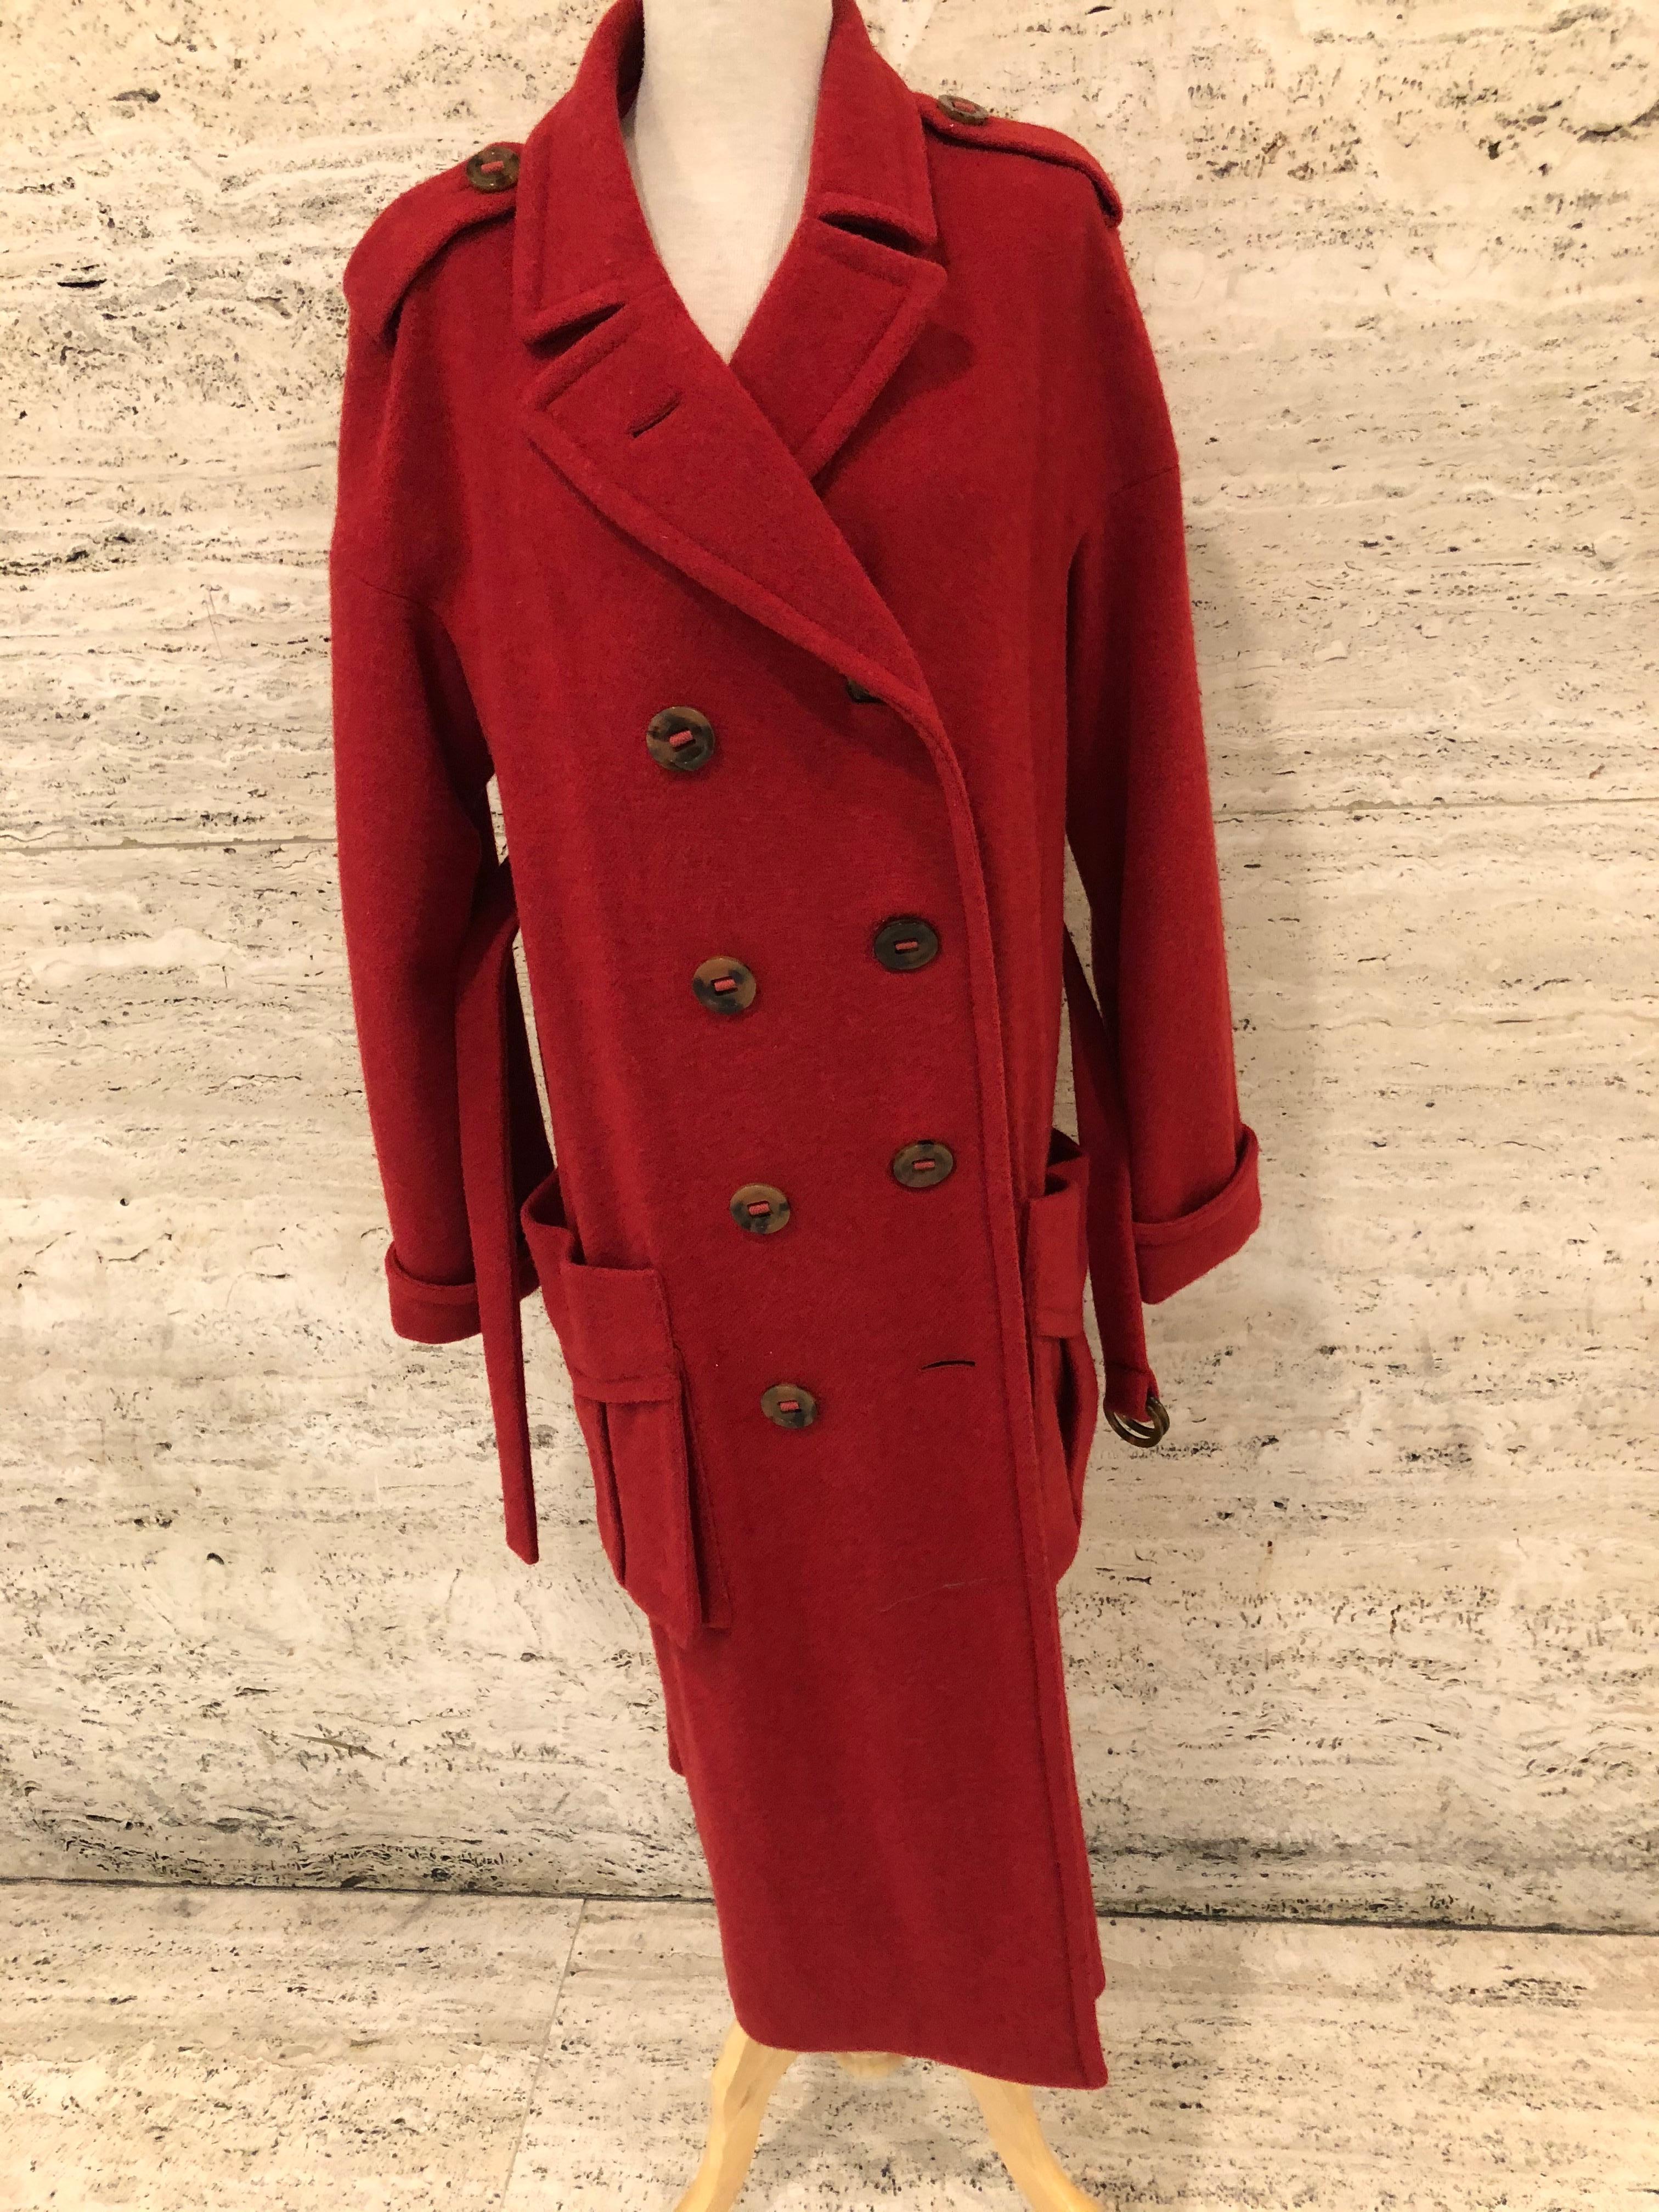 Elegant wool coat by Sonia Rykiel in a vibrant red colour. vintage.
Trench style, dubbel breasted with flap pockets and dropped shoulders.
Cuffed sleeves, brass buttons with 2 loops for the 2 belts.
Only top of coat and sleeves are lined, lining is